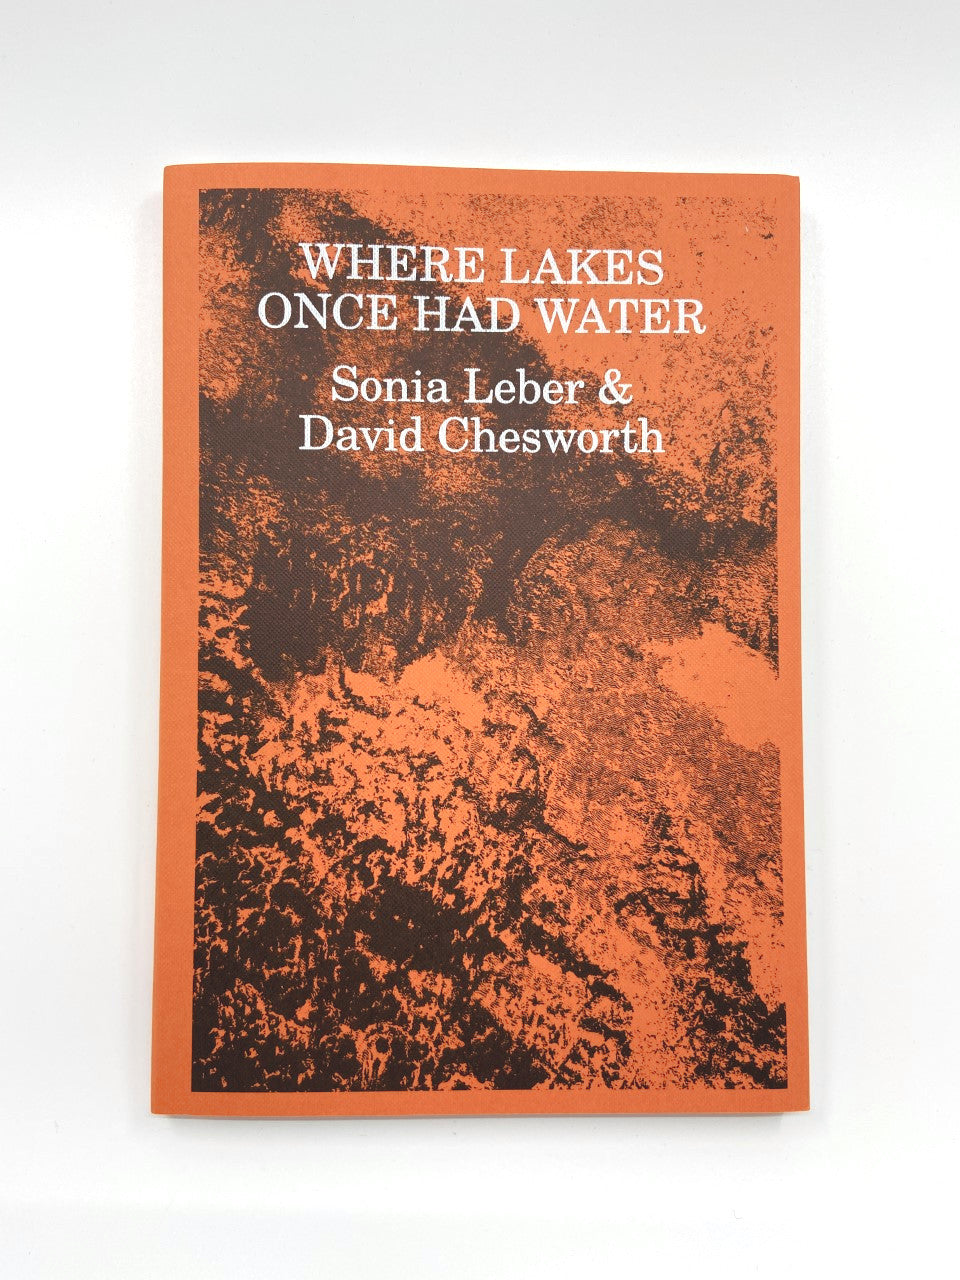 Sonia Leber and David Chesworth: Where Lakes Once Had Water